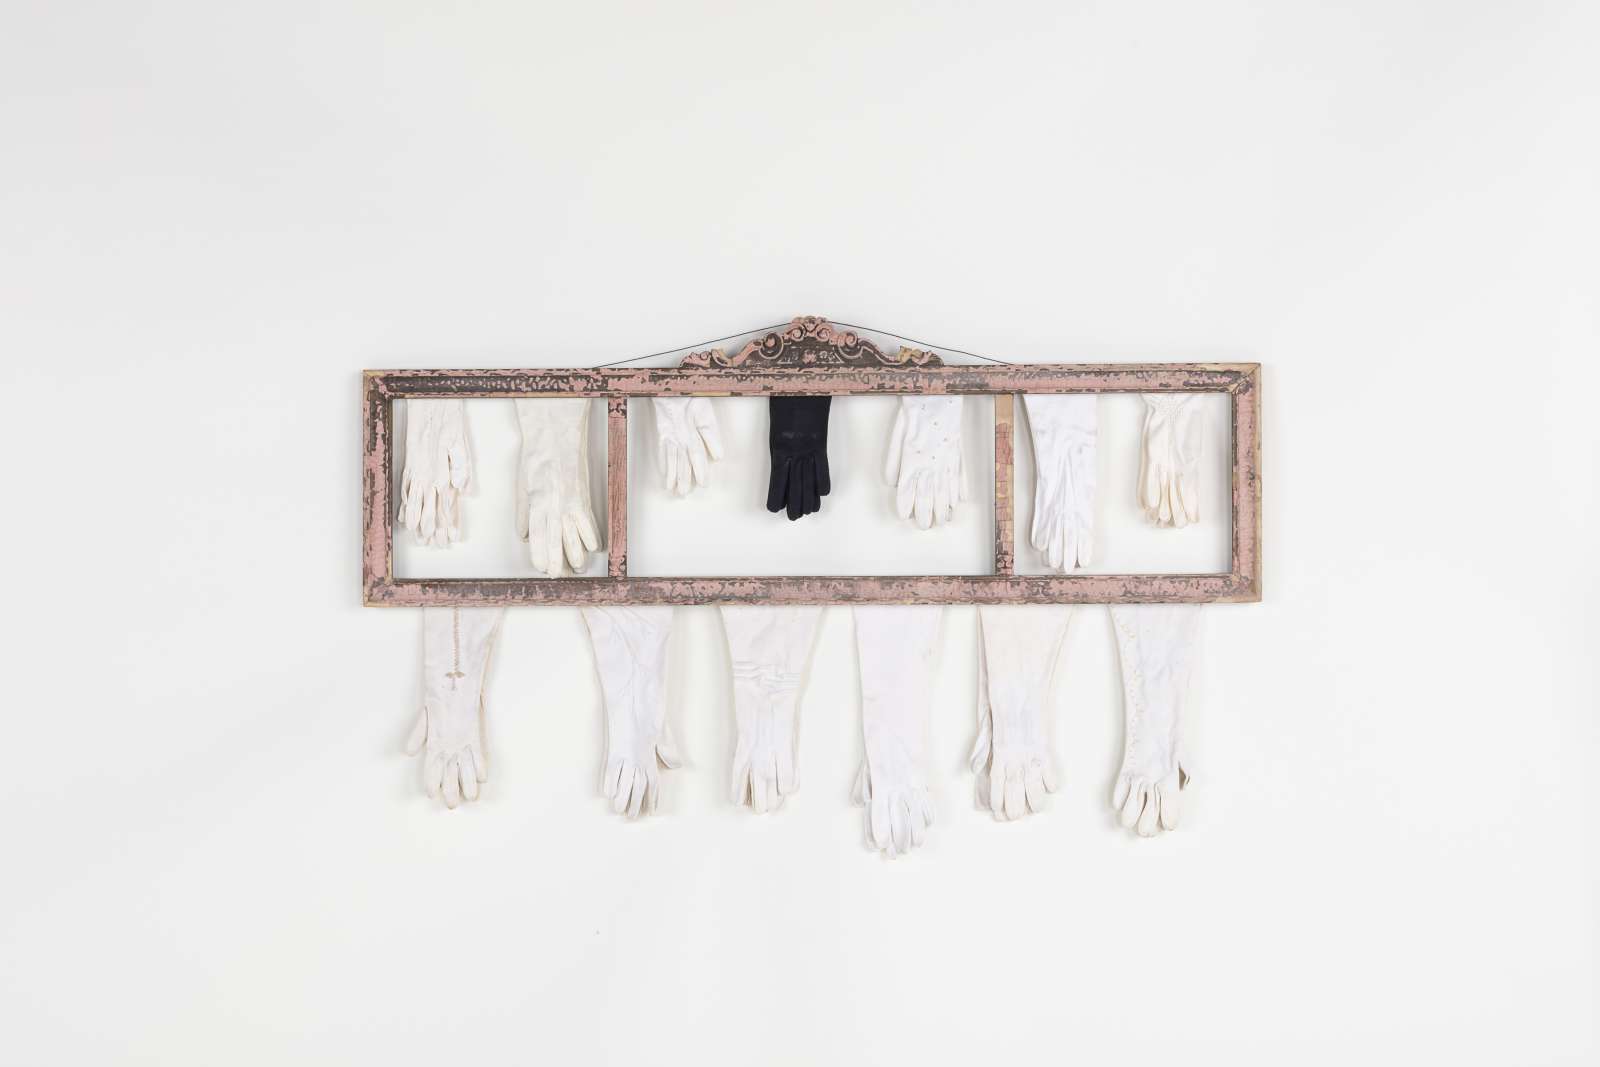 Lonnie Holley, Working in the House, 2020, Wooden frame, metal wire and cotton gloves, 74 x 120.8 x 3 cm